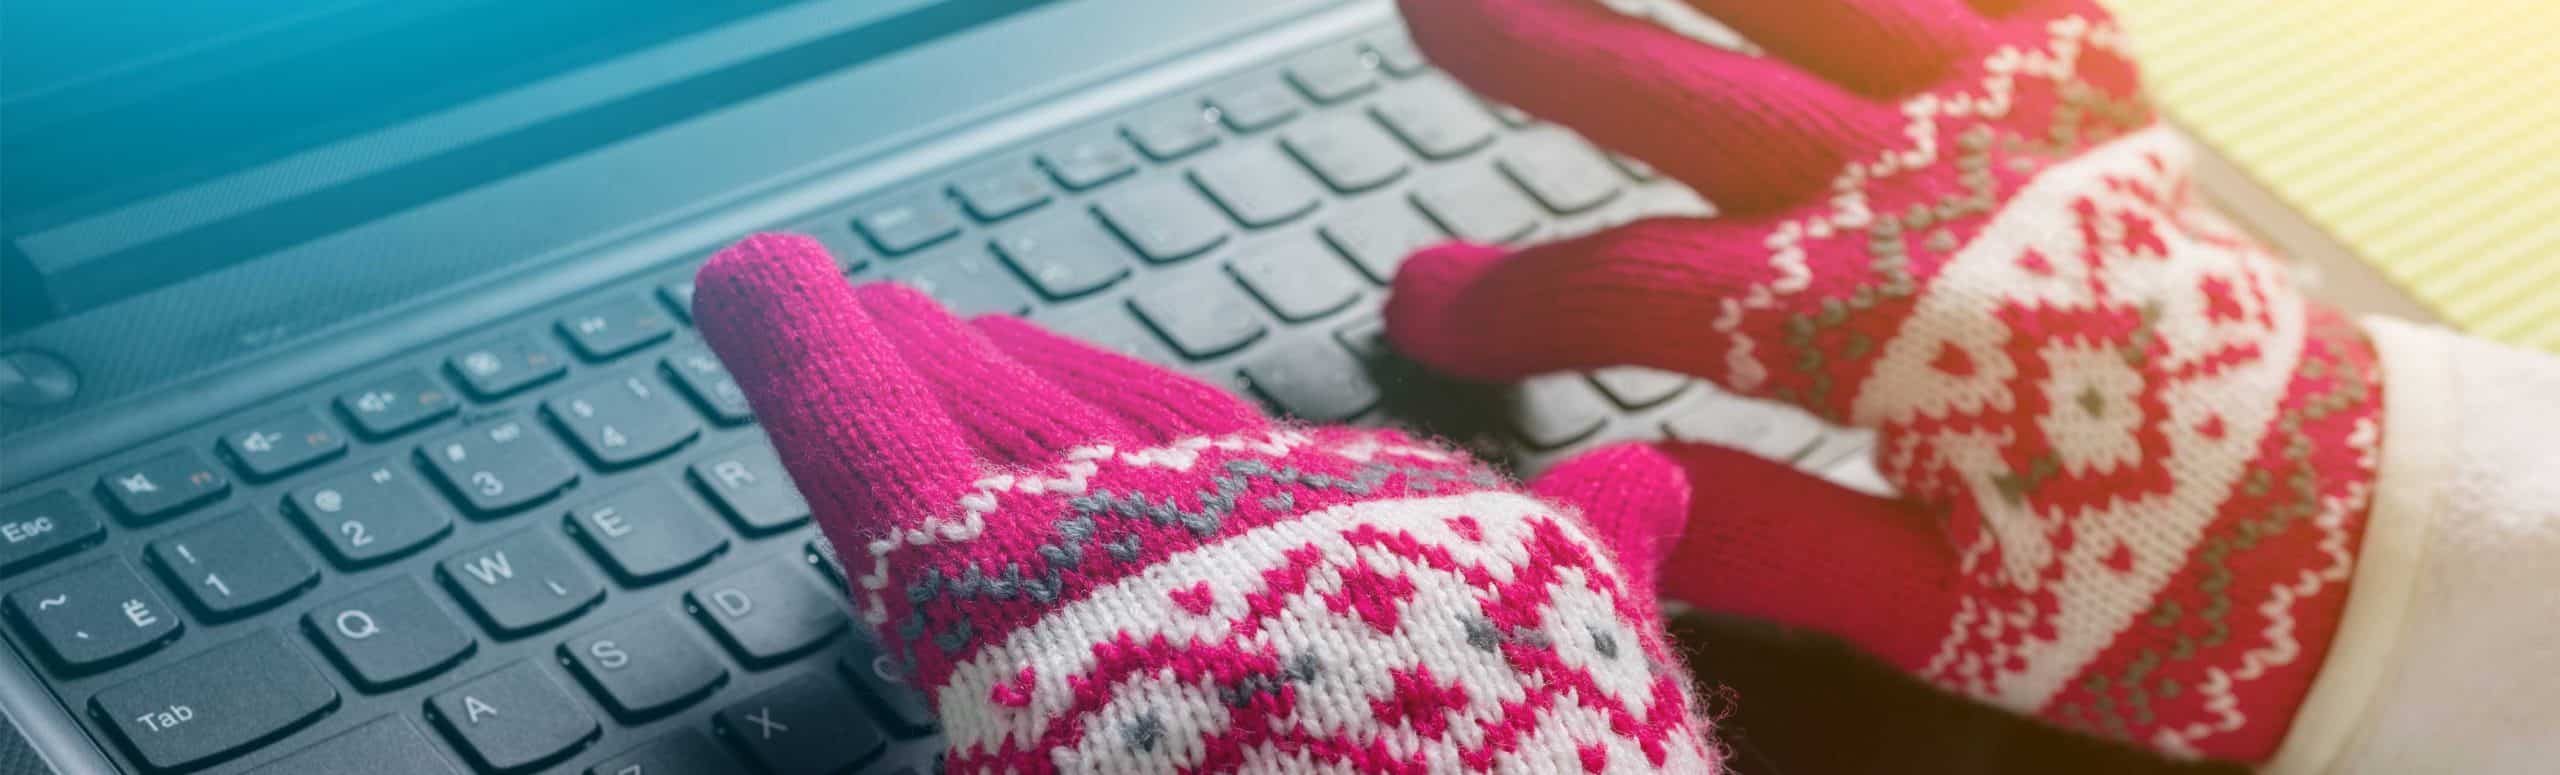 close up of a person wearing winter gloves and typing on a keyboard